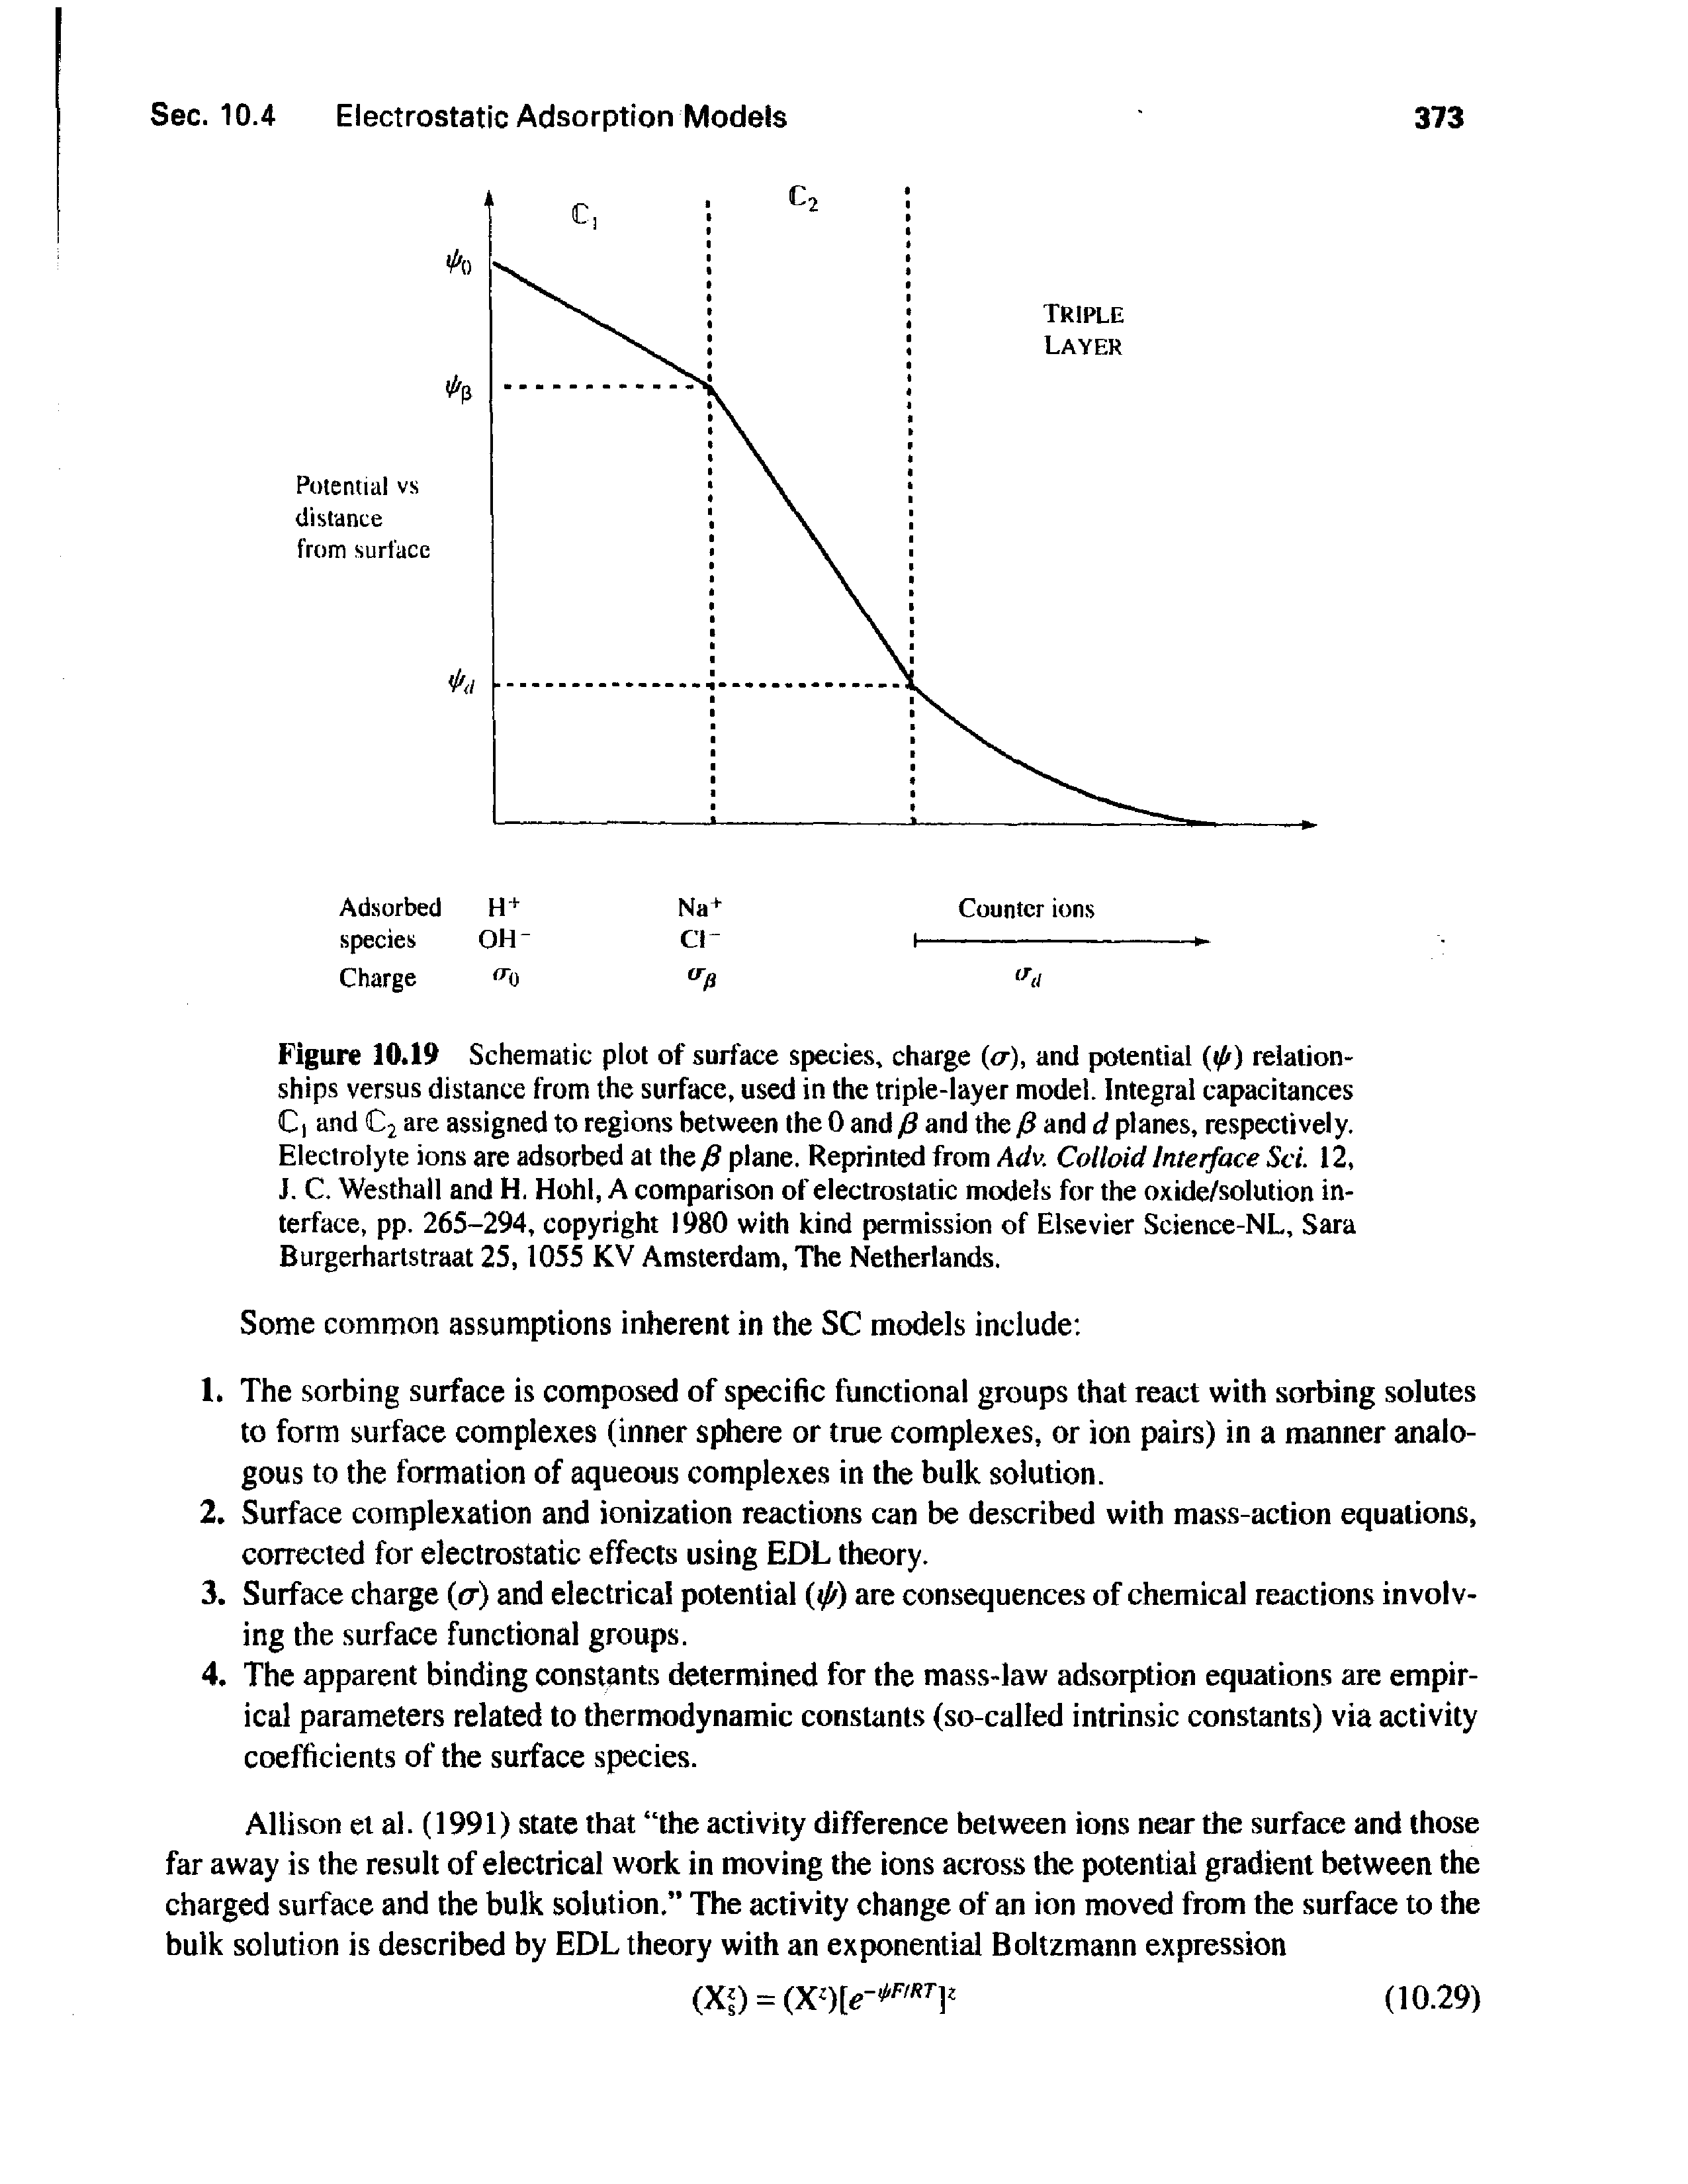 Figure 10.19 Schematic plot of surface species, charge (cr), and potential tfr) relationships versus distance from the surface, used in the triple-layer model. Integral capacitances C and C2 are assigned to regions between the 0 and /3 and the fi and d planes, respectively. Electrolyte ions are adsorbed at the plane. Reprinted from Adv. Colloid Interface ScL 12,...